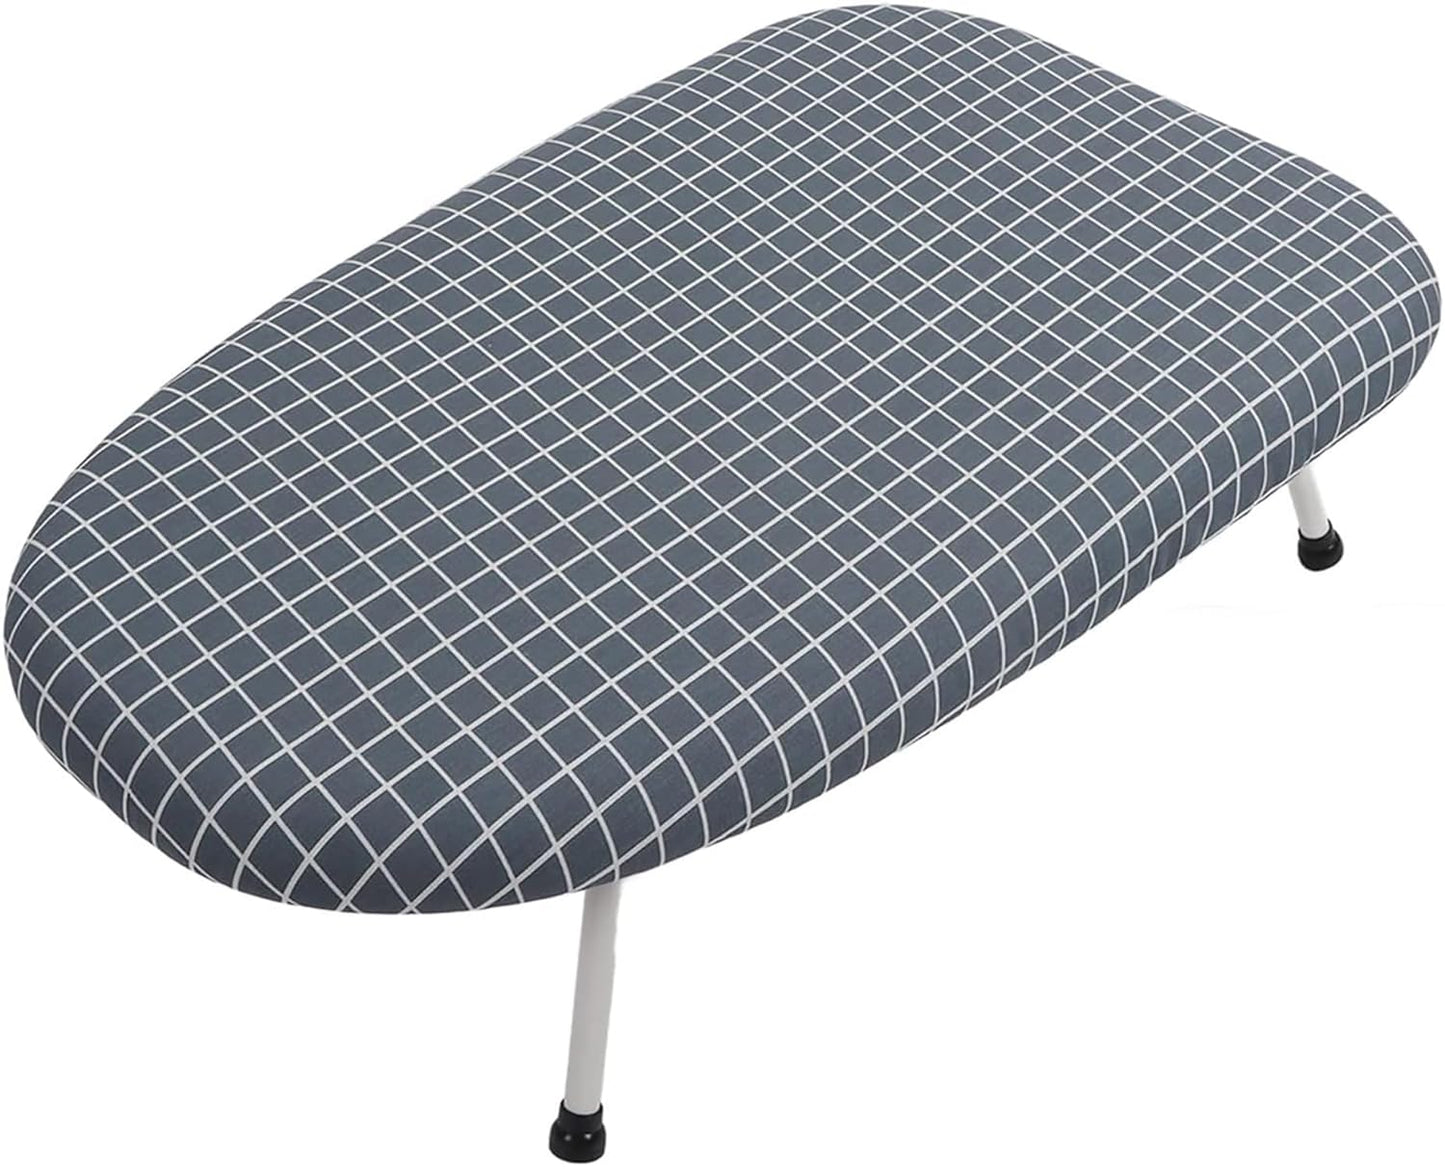 Ironing Board with Folding Legs Extra Wide Countertop